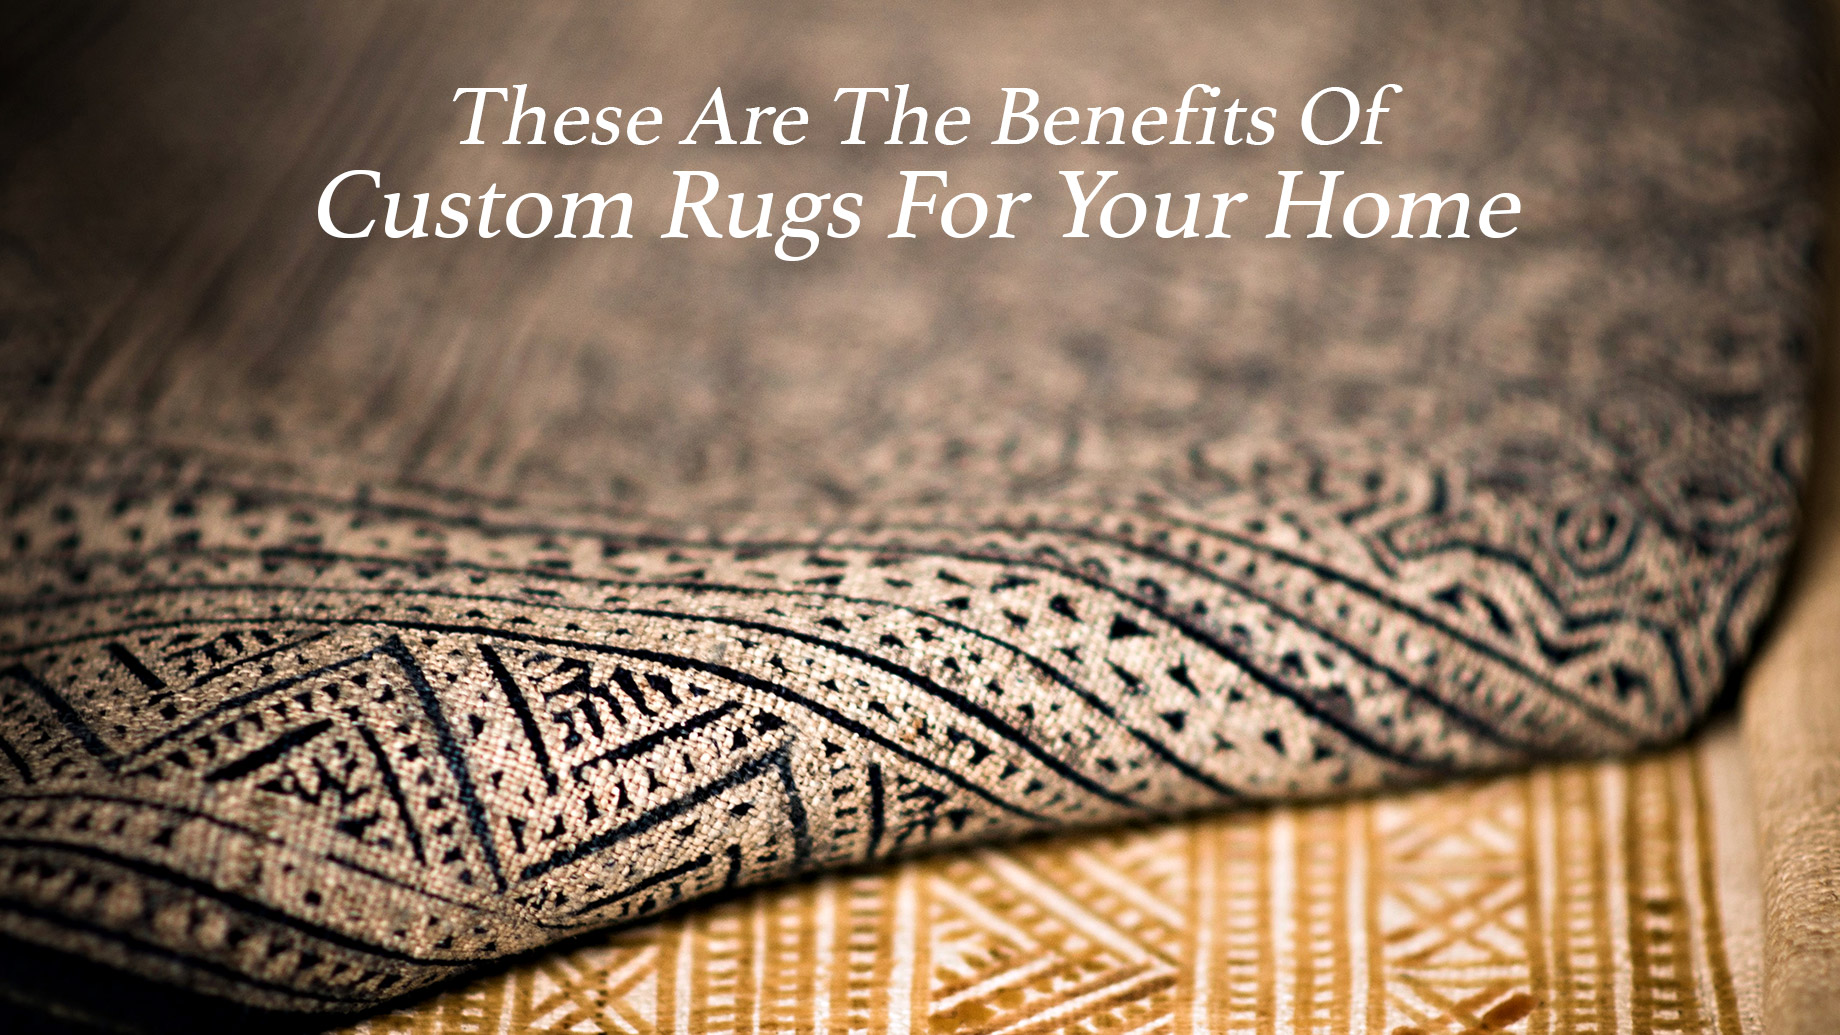 These Are The Benefits Of Custom Rugs For Your Home